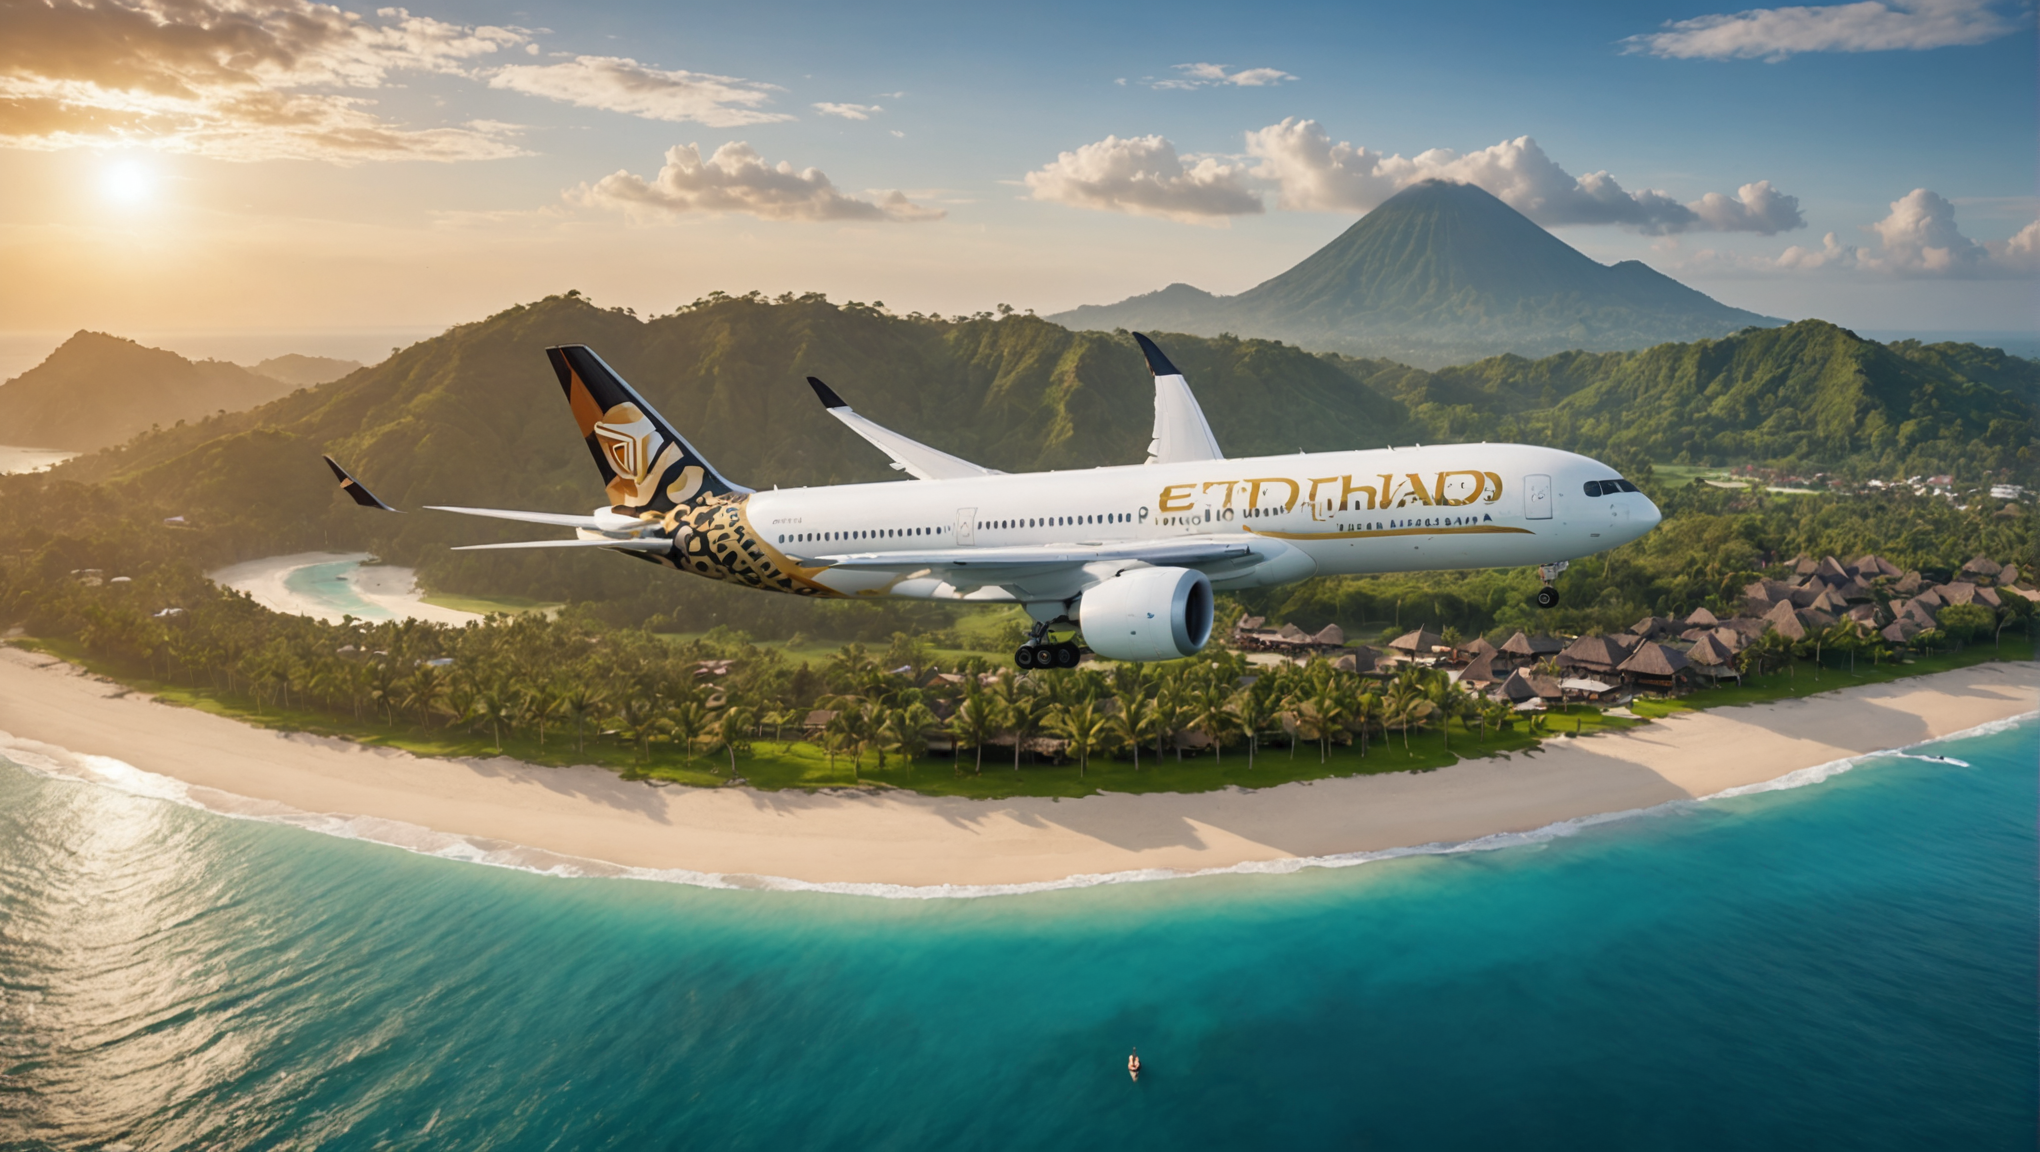 discover etihad airways' new direct flight to the beautiful island of bali, book your tickets now and get ready for an unforgettable journey.